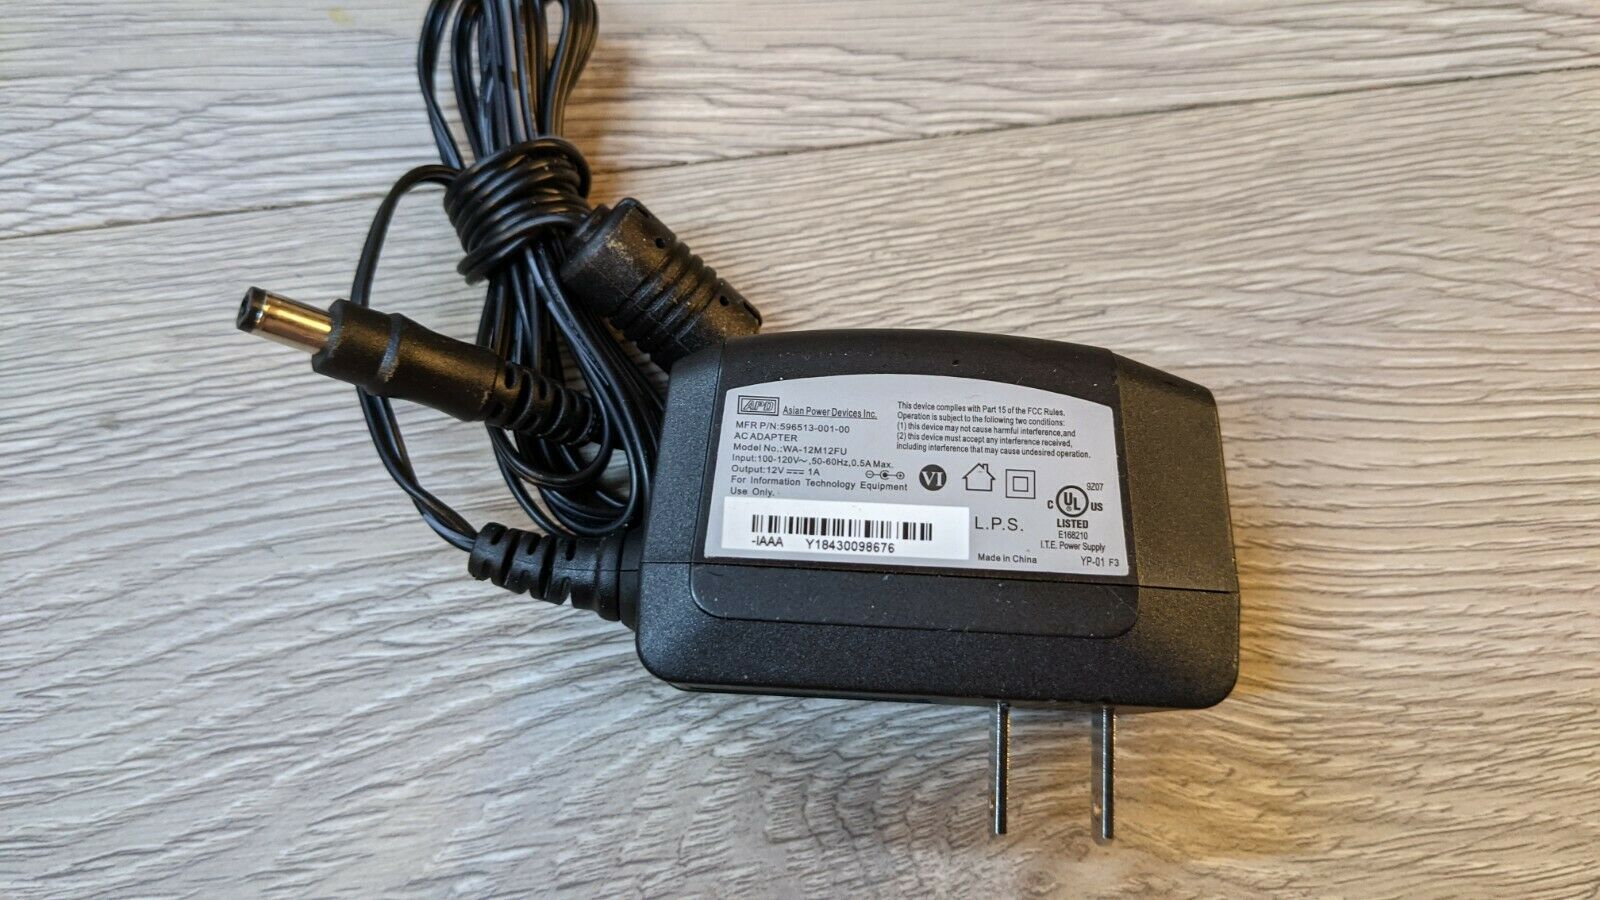 12V Asian Power Devices APD WA-12M12FU AC Adapter Power Supply Connection Split